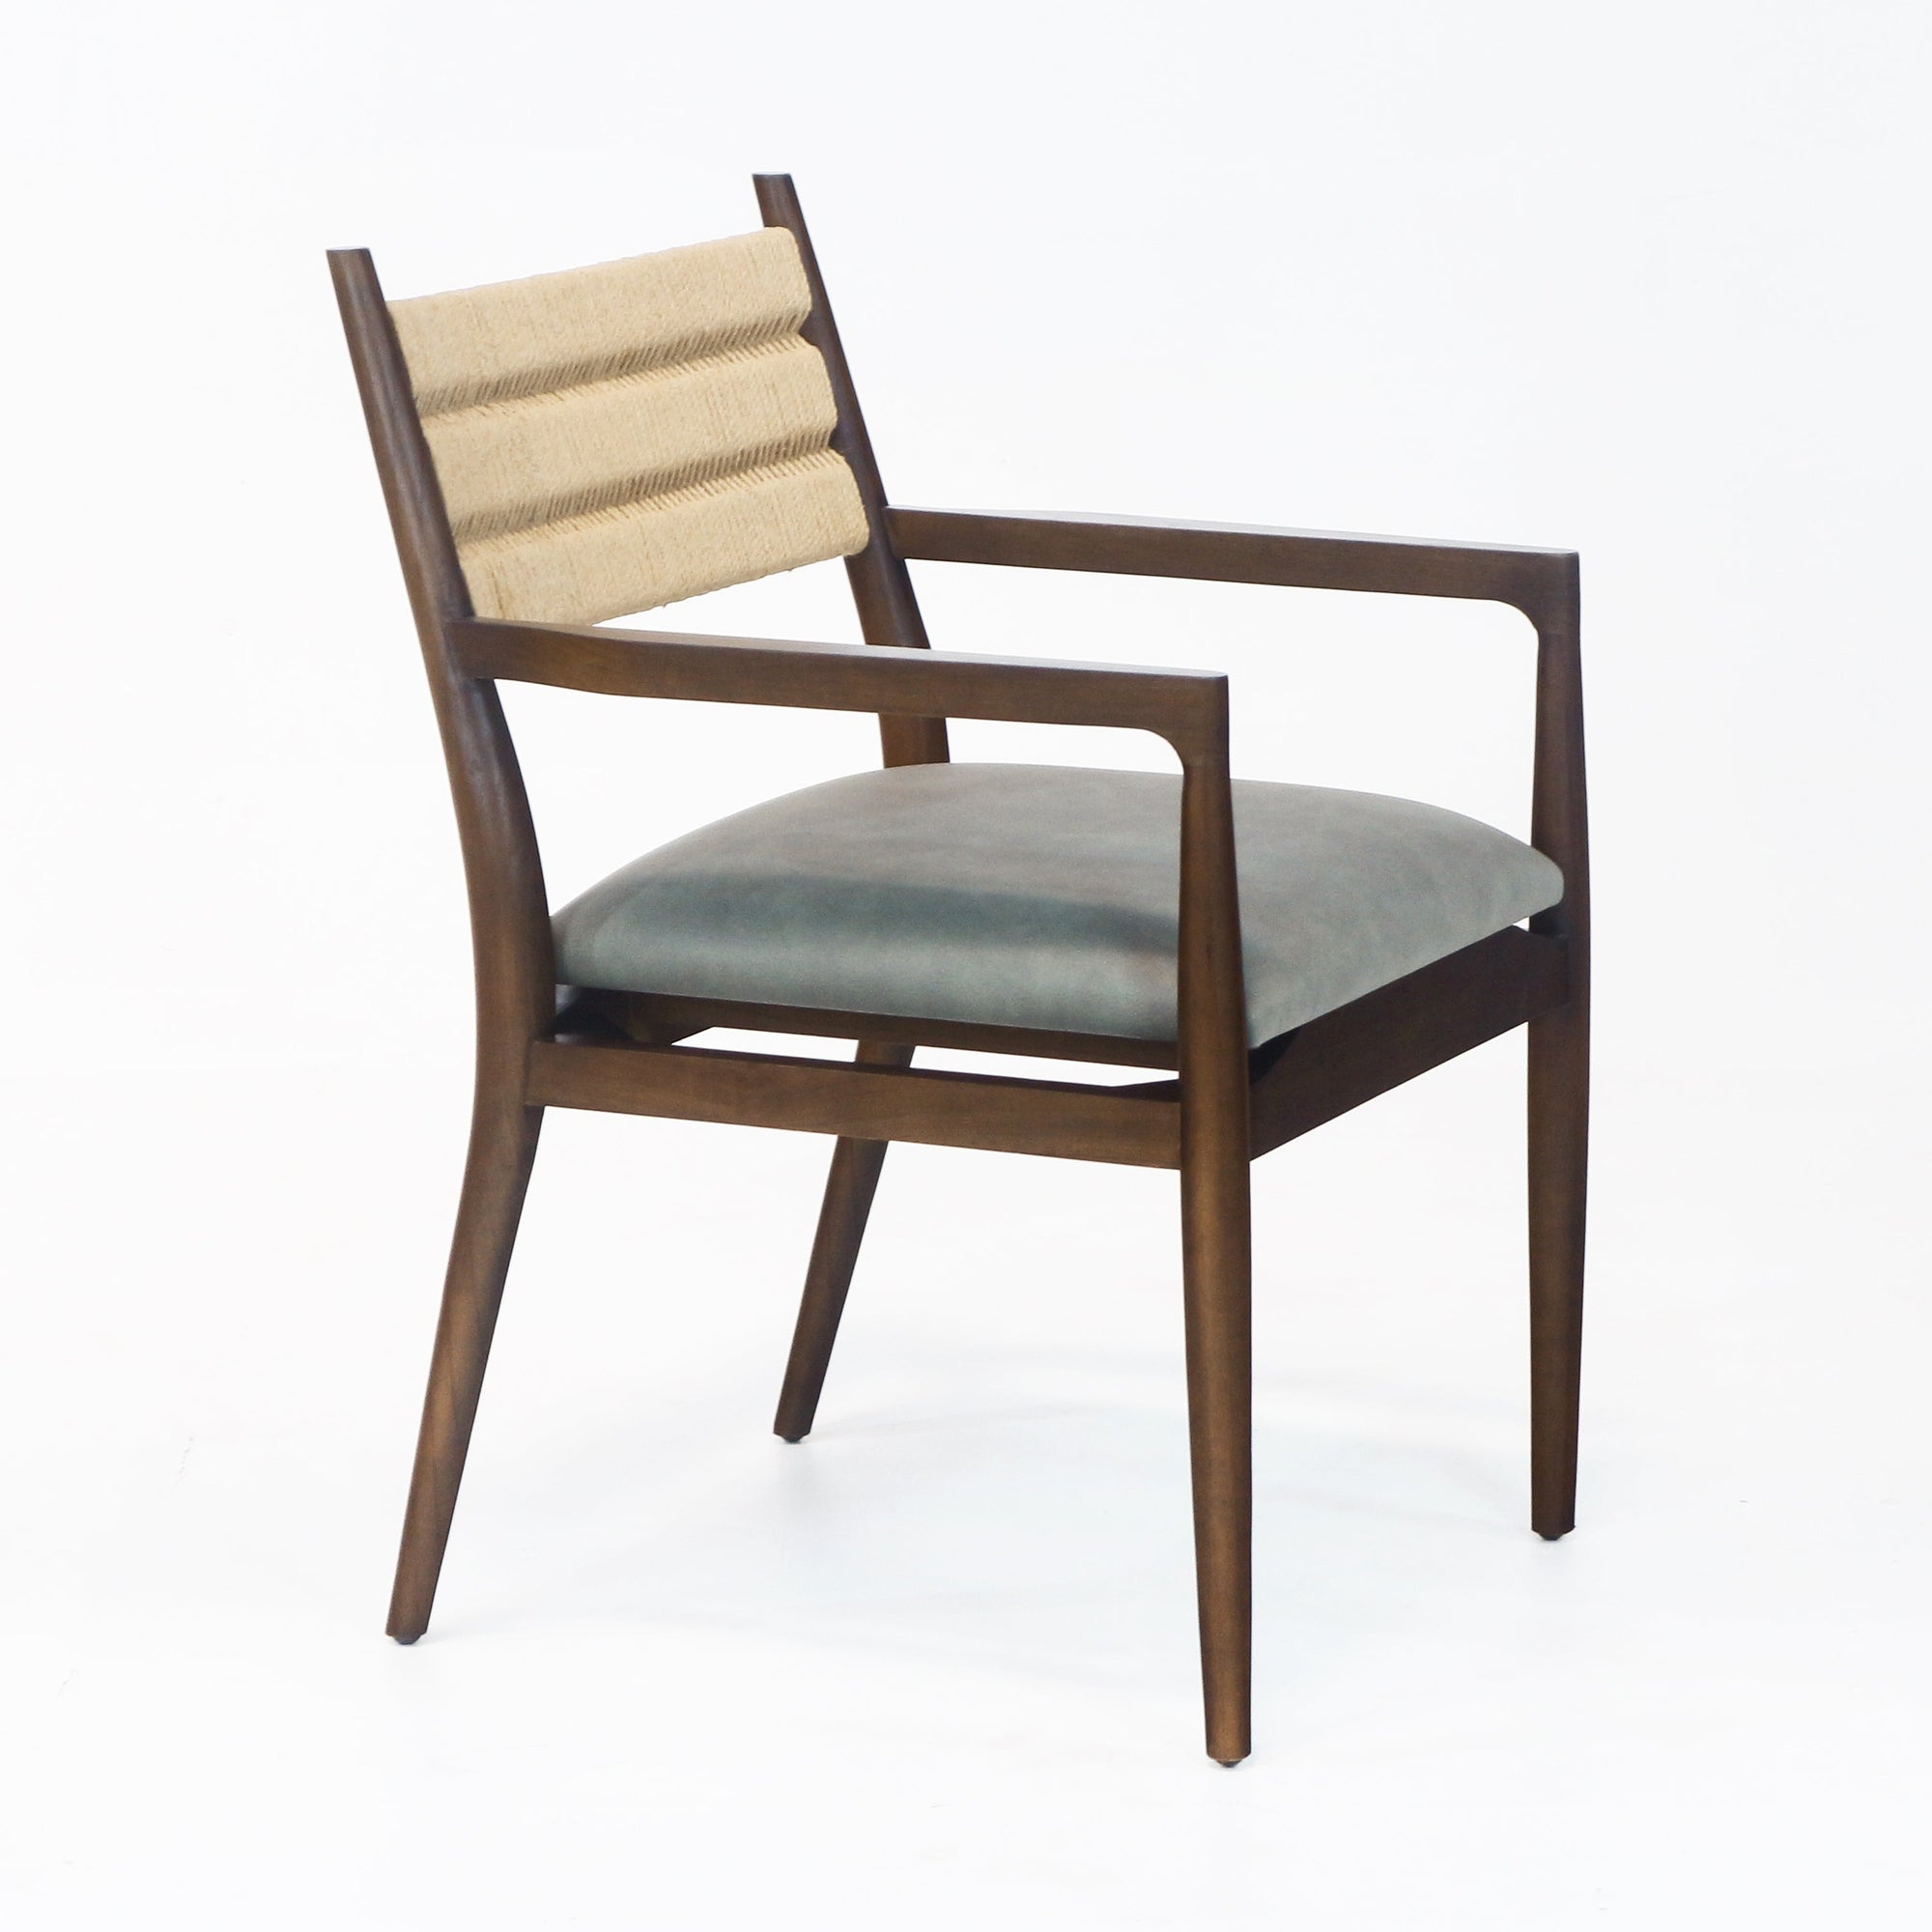 Samsara Dining Chair with Rope Backrest with Blue Leather Seat